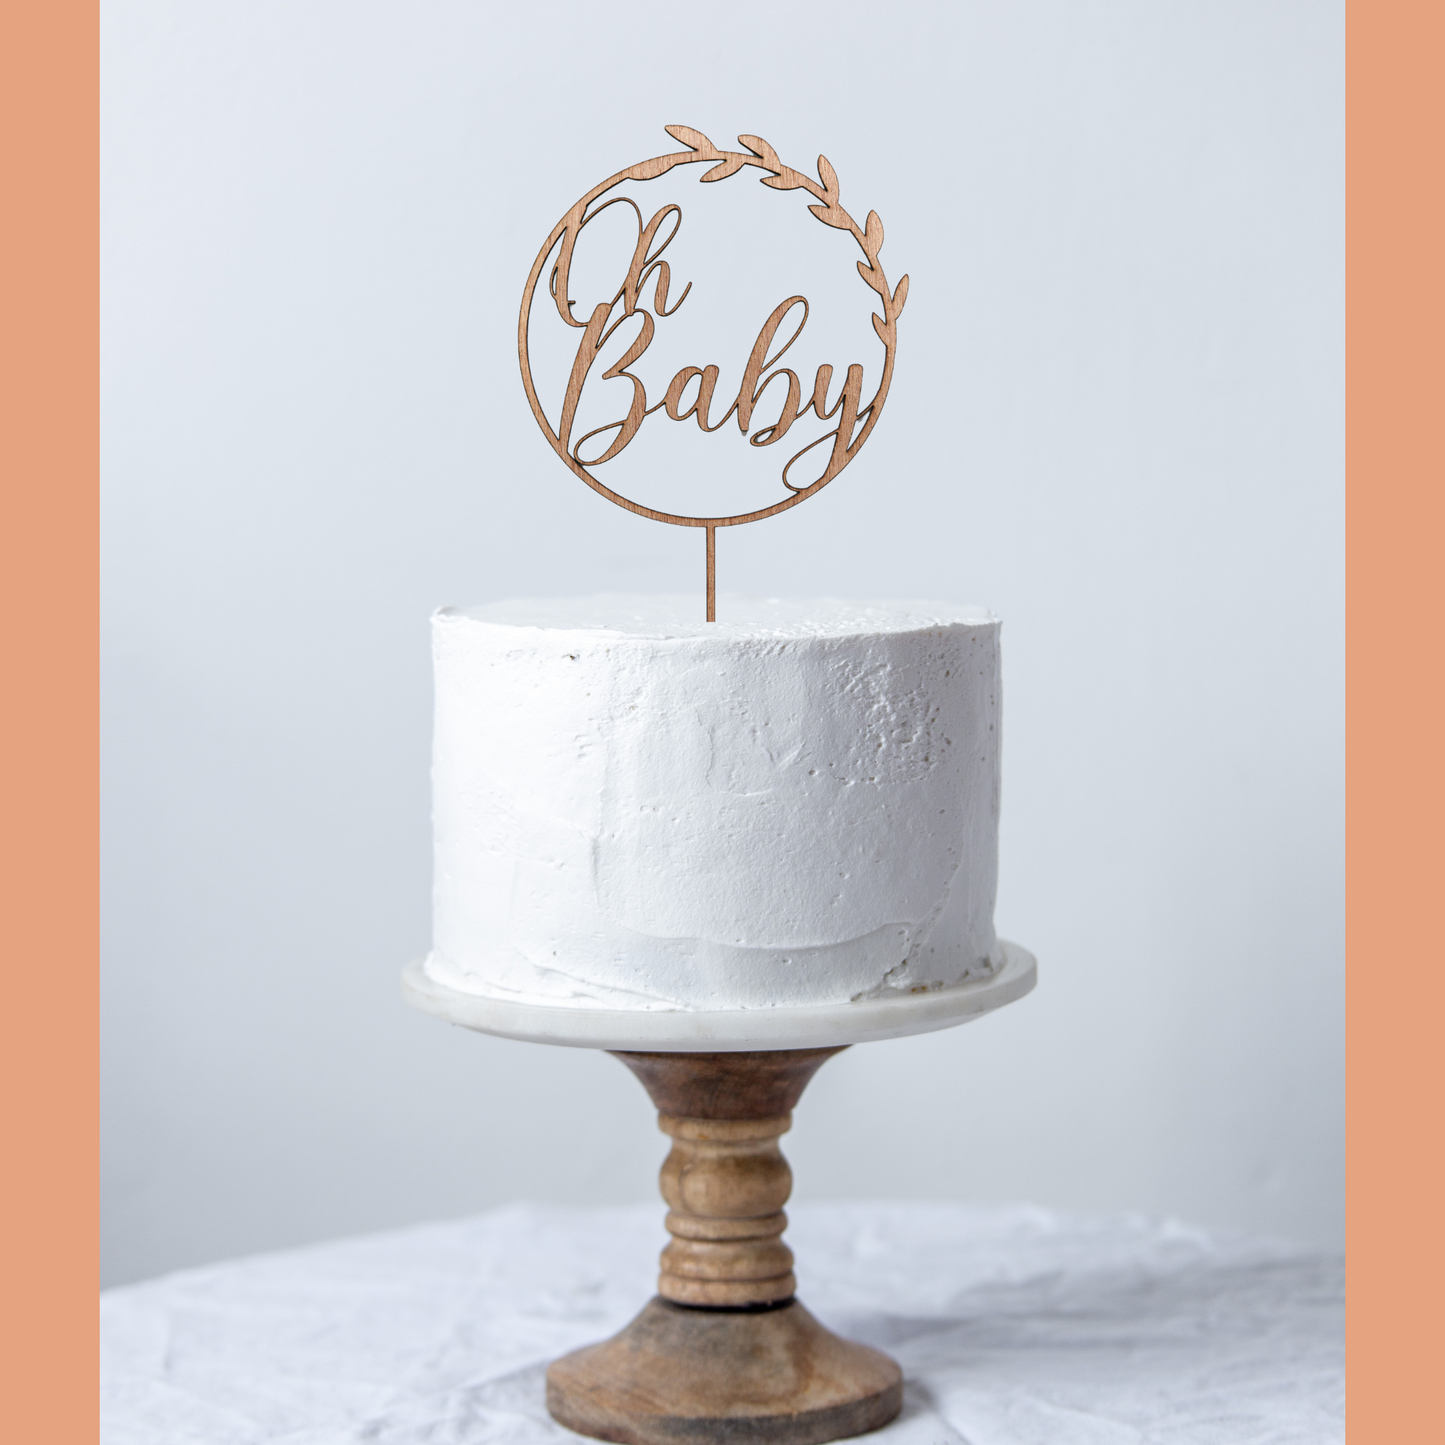 Oh Baby Circle Wreath Cake Topper